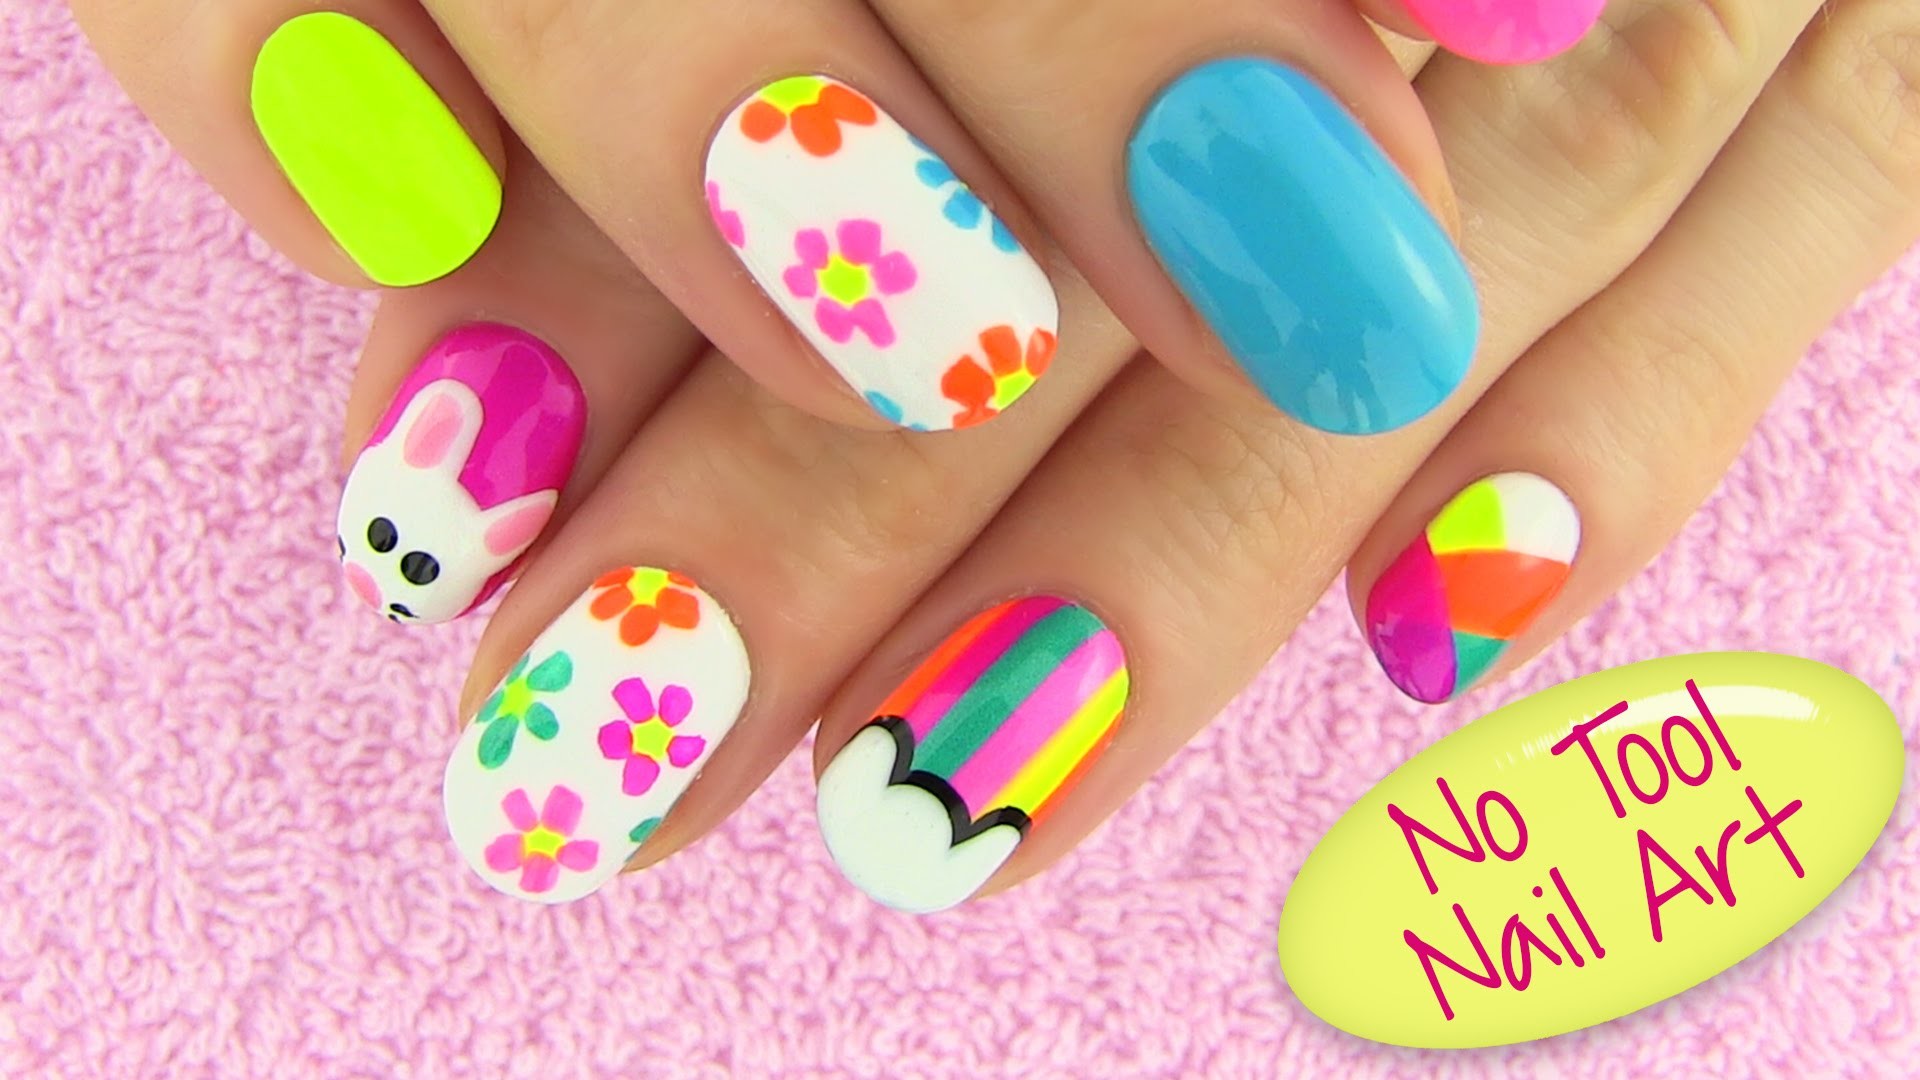 1920x1080 DIY Nail Art Without any Tools! 5 Nail Art Designs - DIY Projects - YouTube